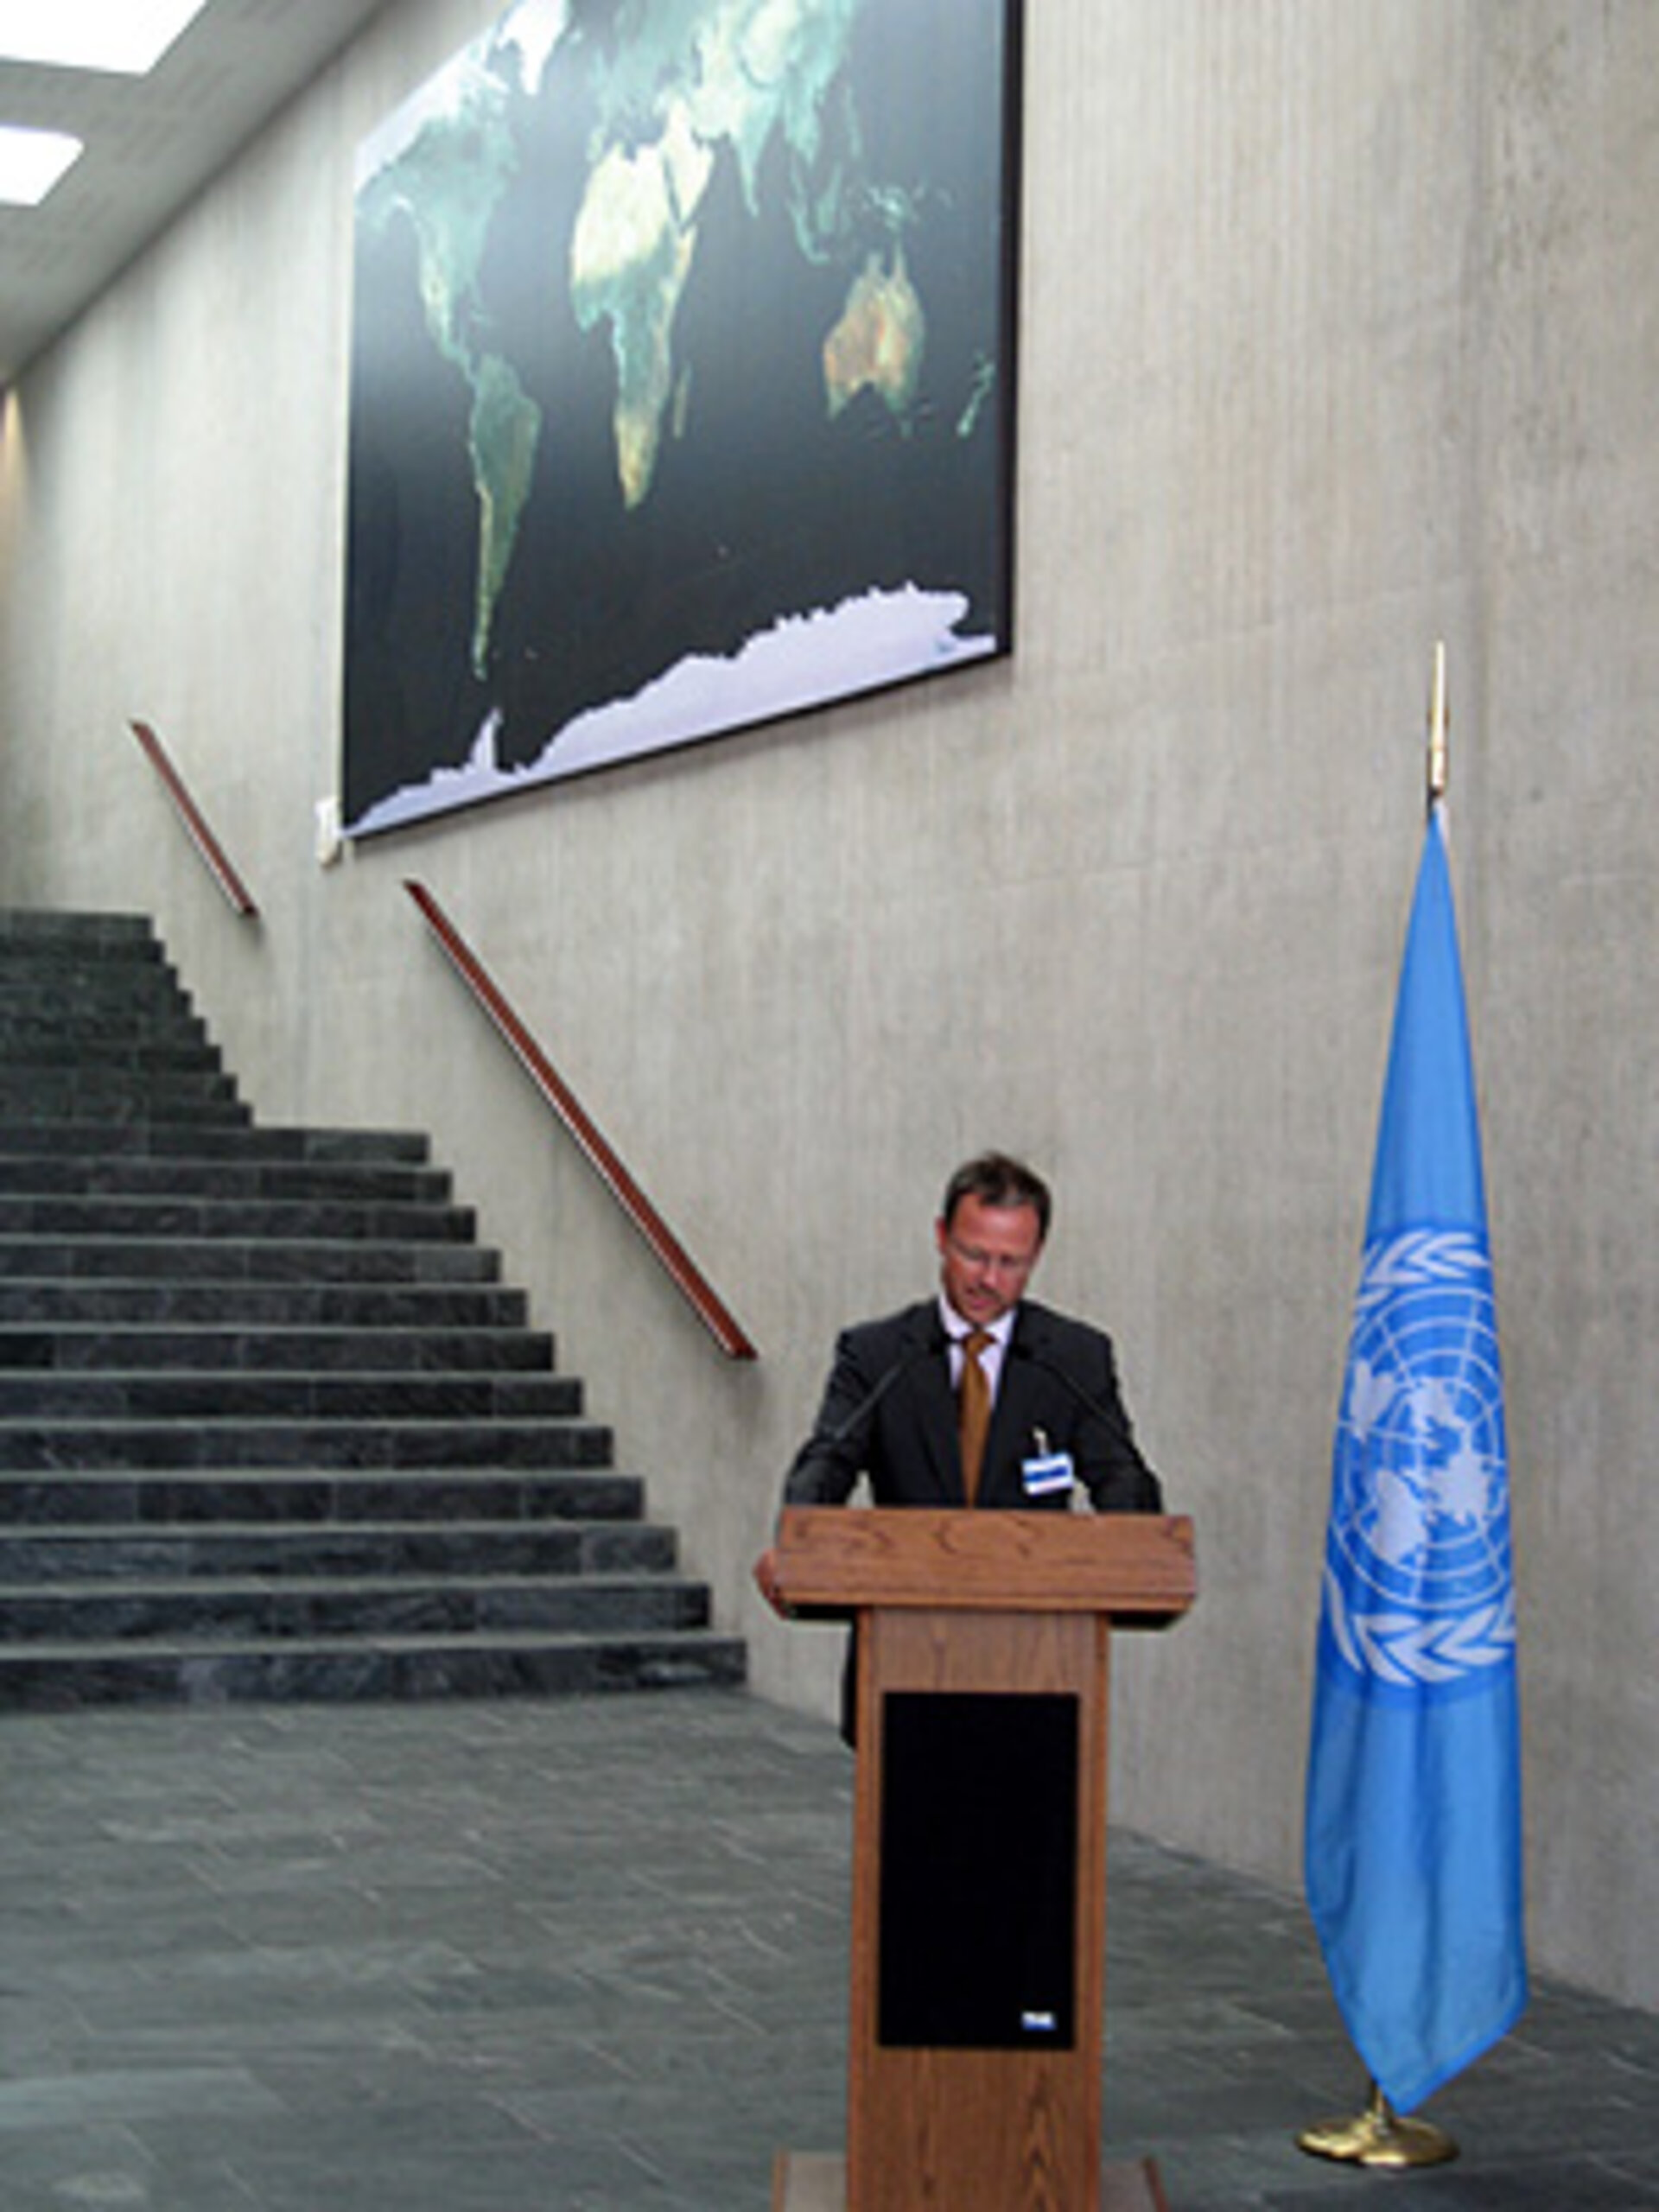 Mr.Volker Libeig during his speech at the donation event